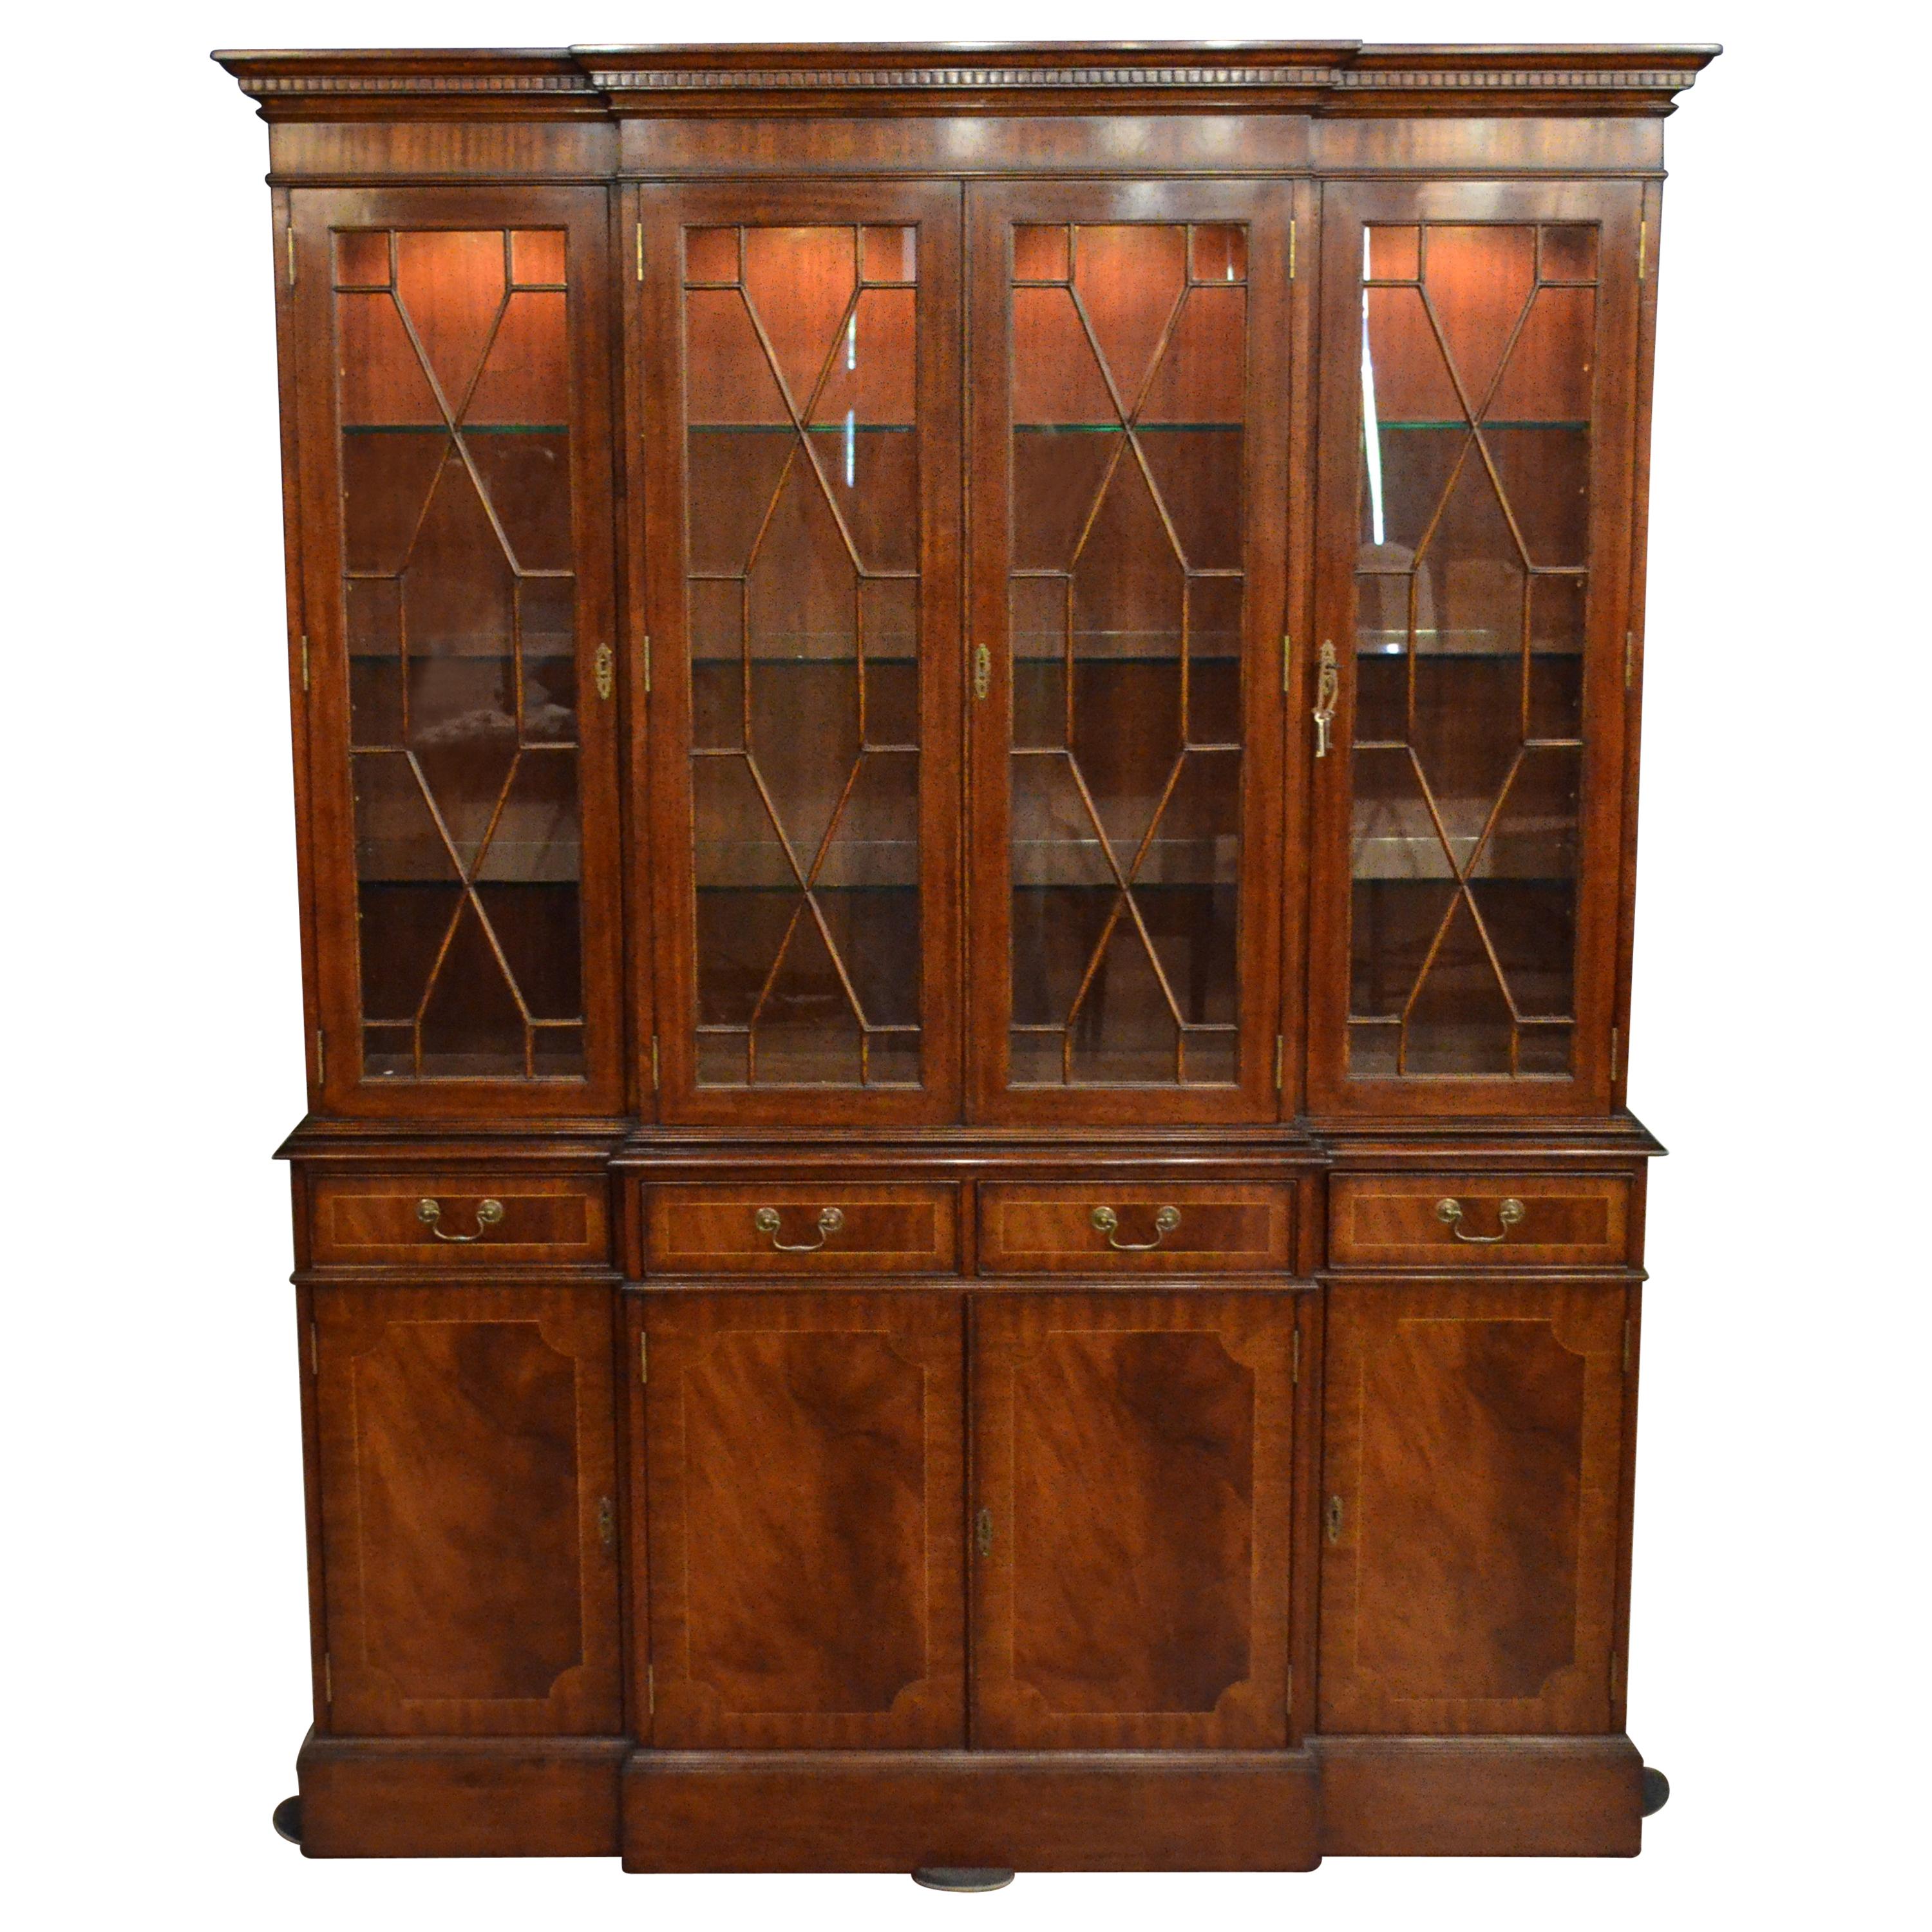 Mahogany Georgian Style Four Door Bookcase China Cabinet by Leighton Hall